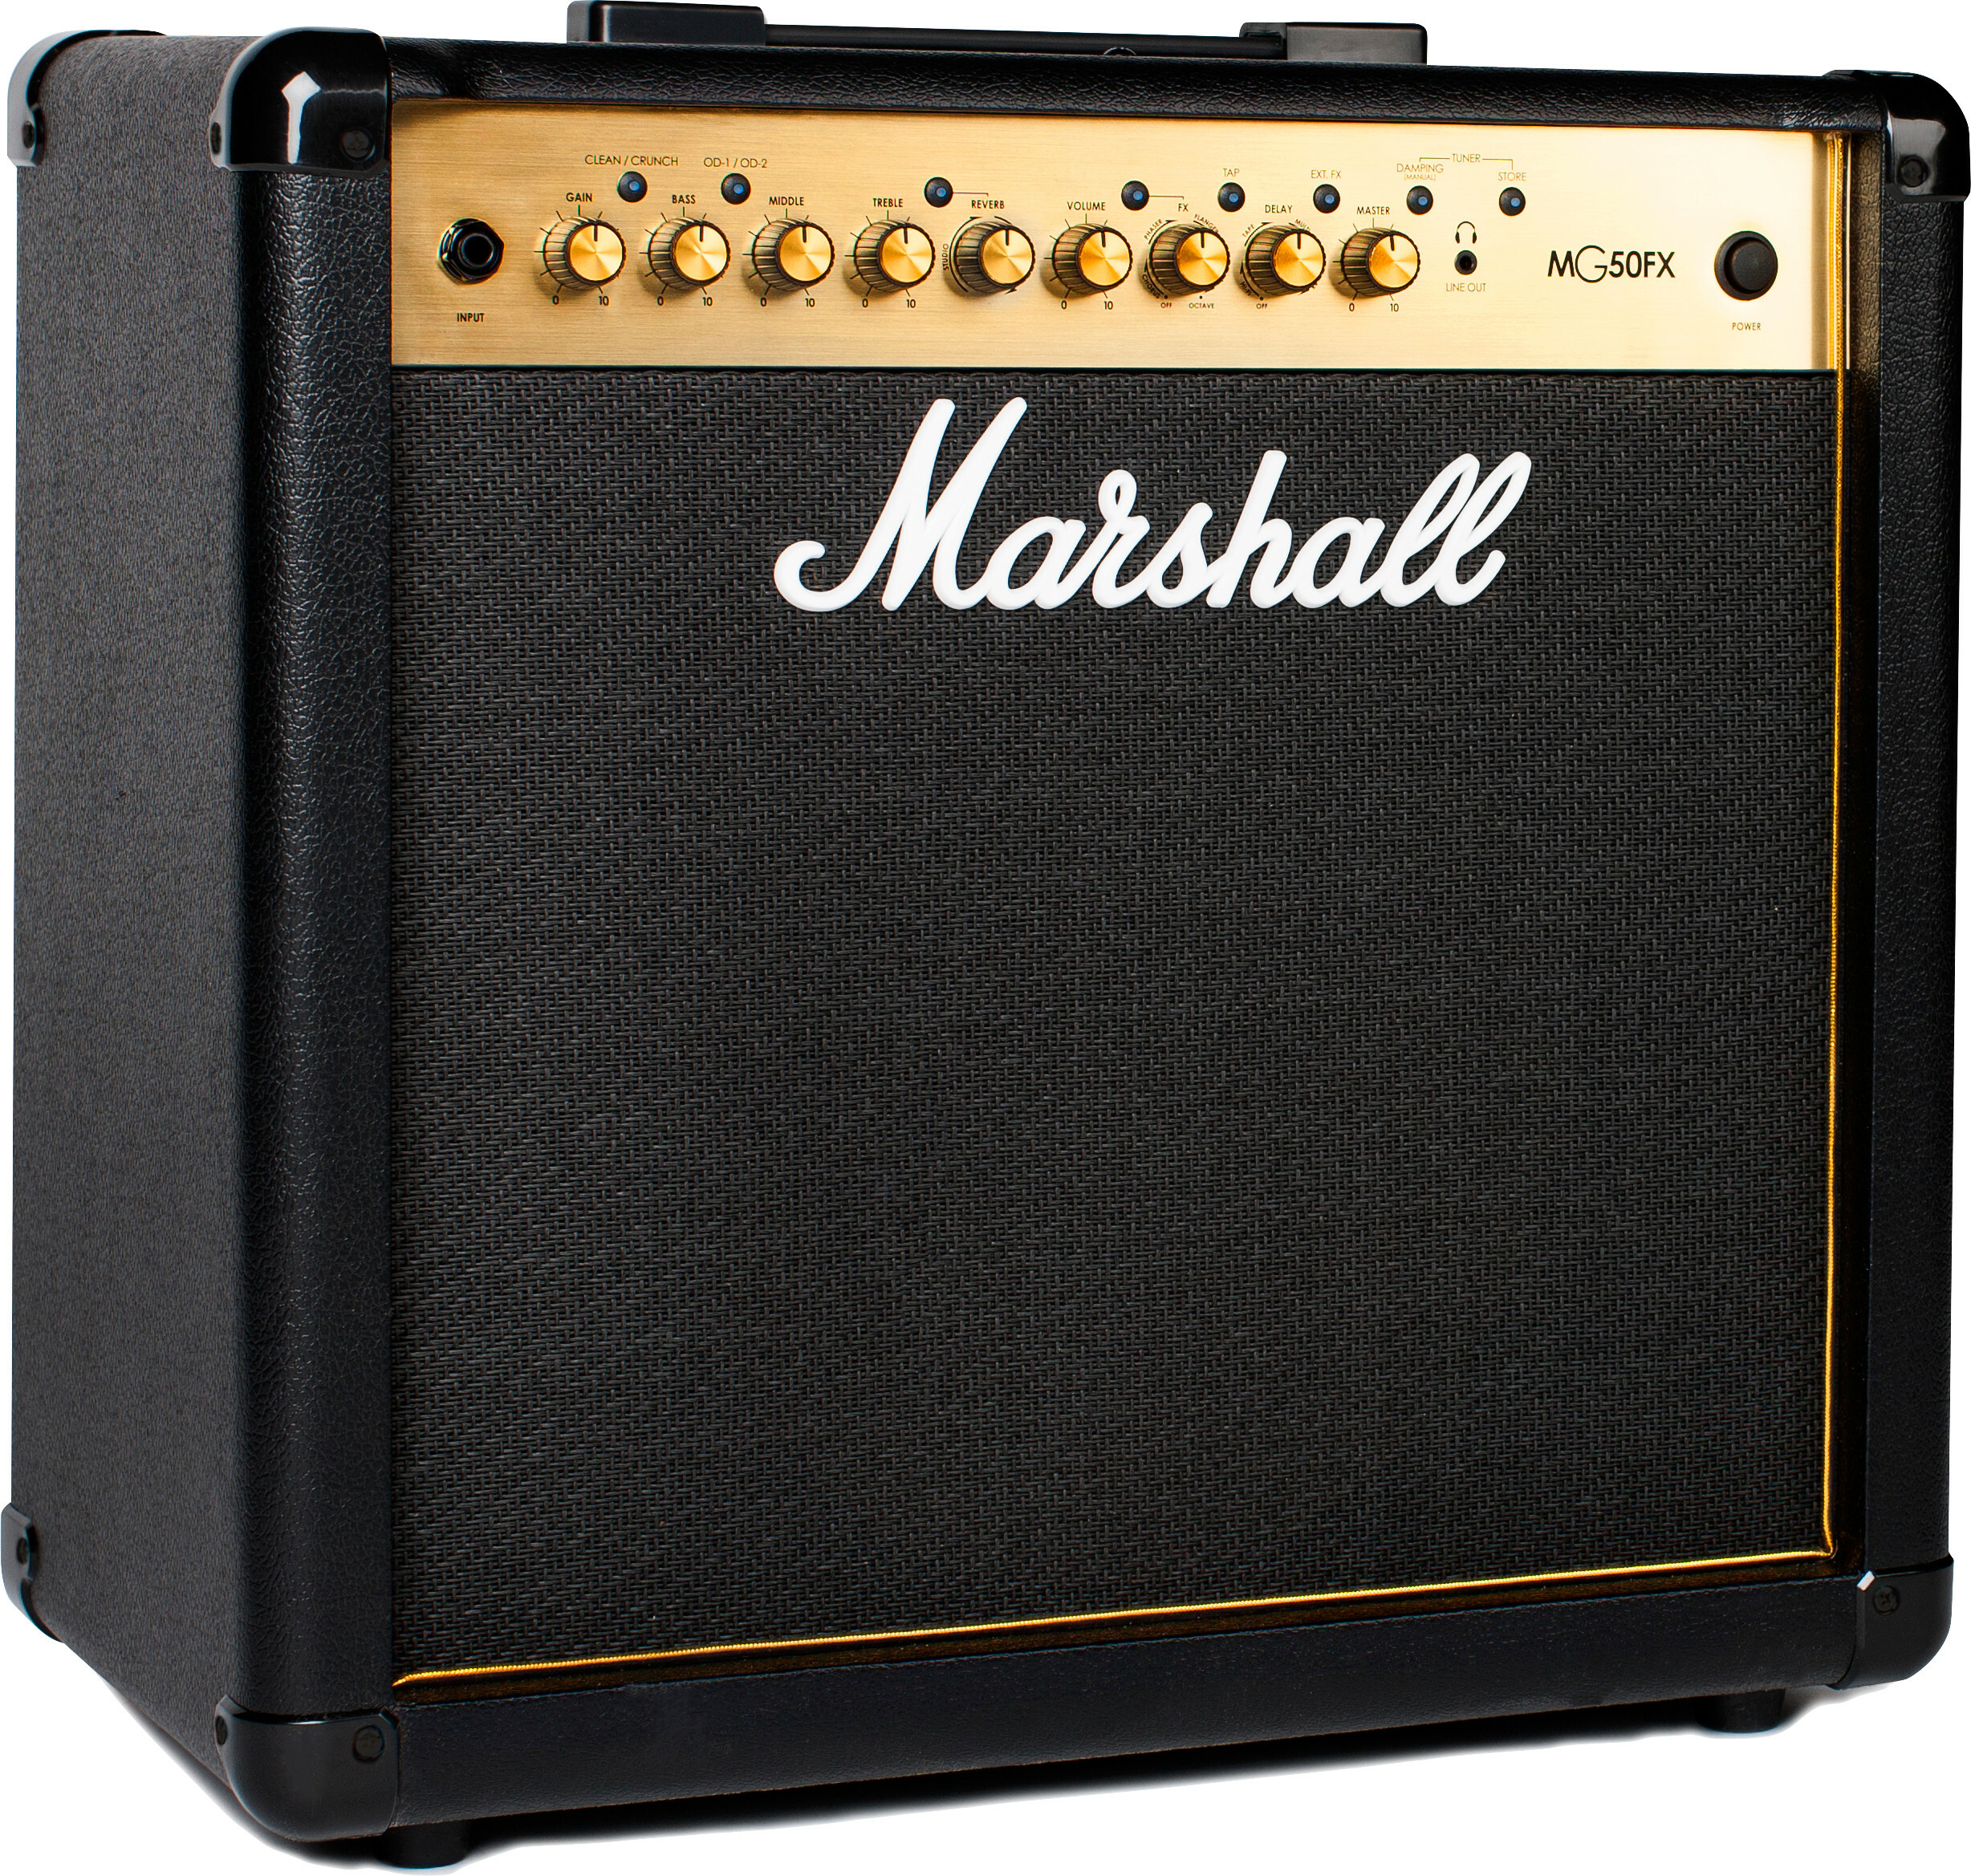 Marshall Mg50gfx Gold Combo 50 W - Electric guitar combo amp - Main picture